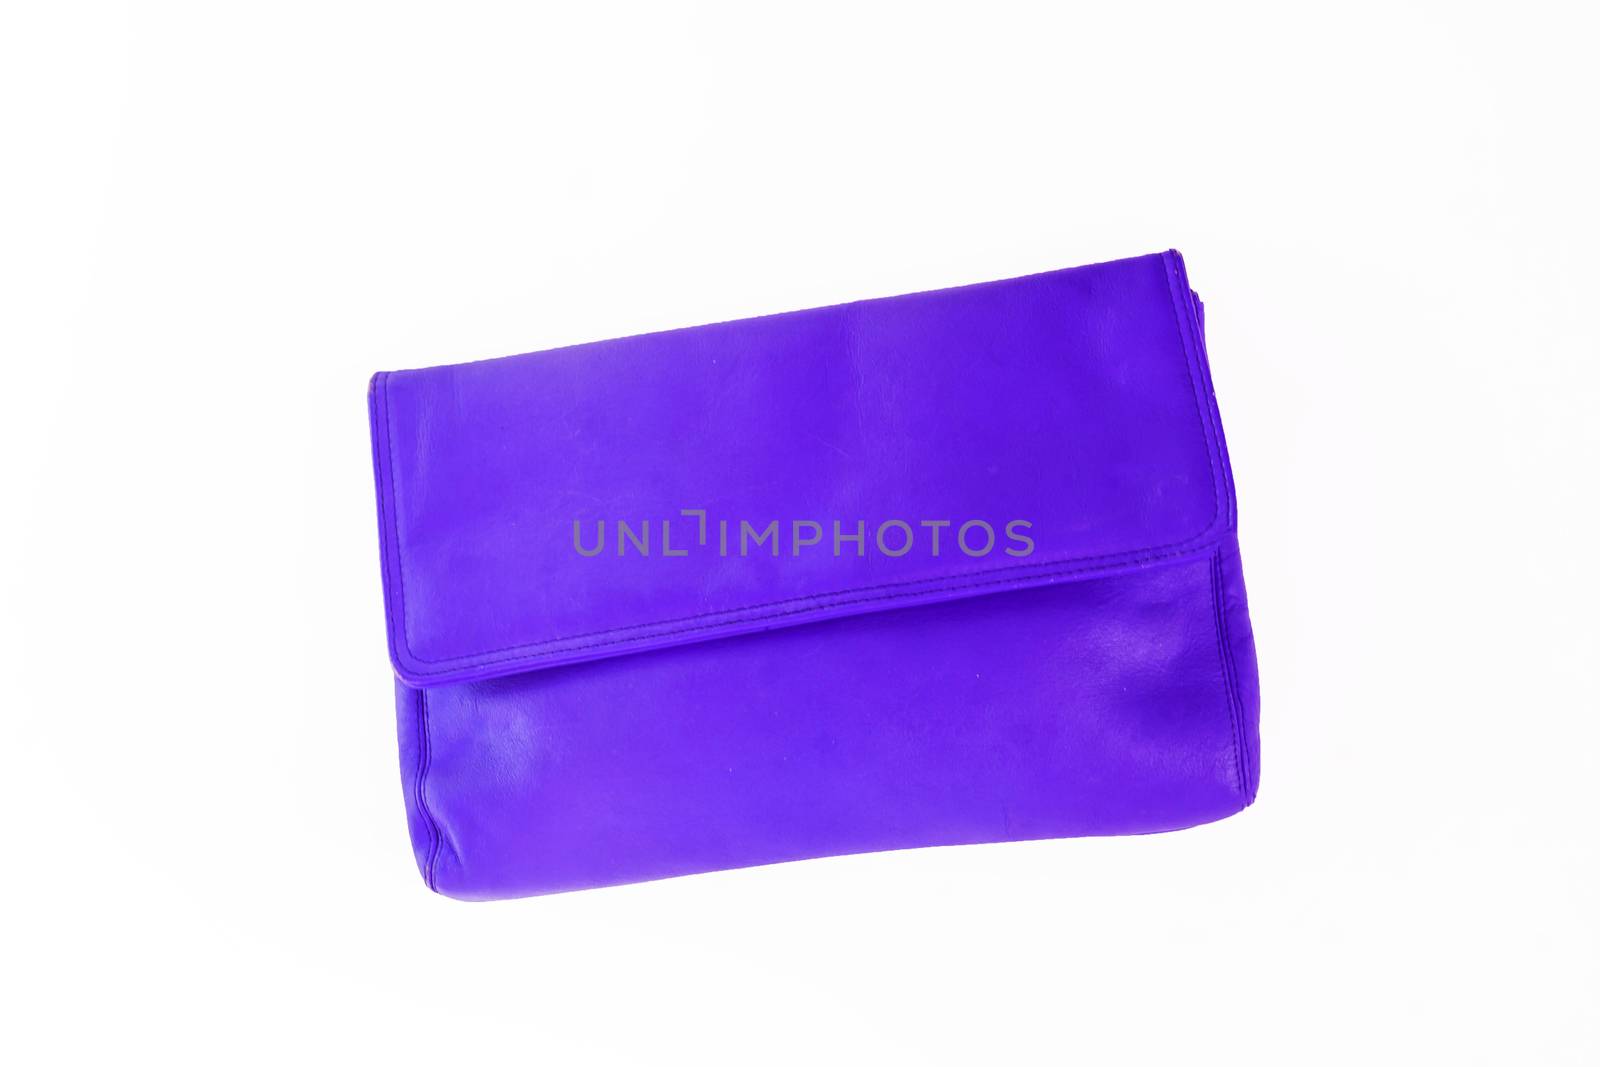 colorful fashionable clutch bag isolated on white background by Tanacha